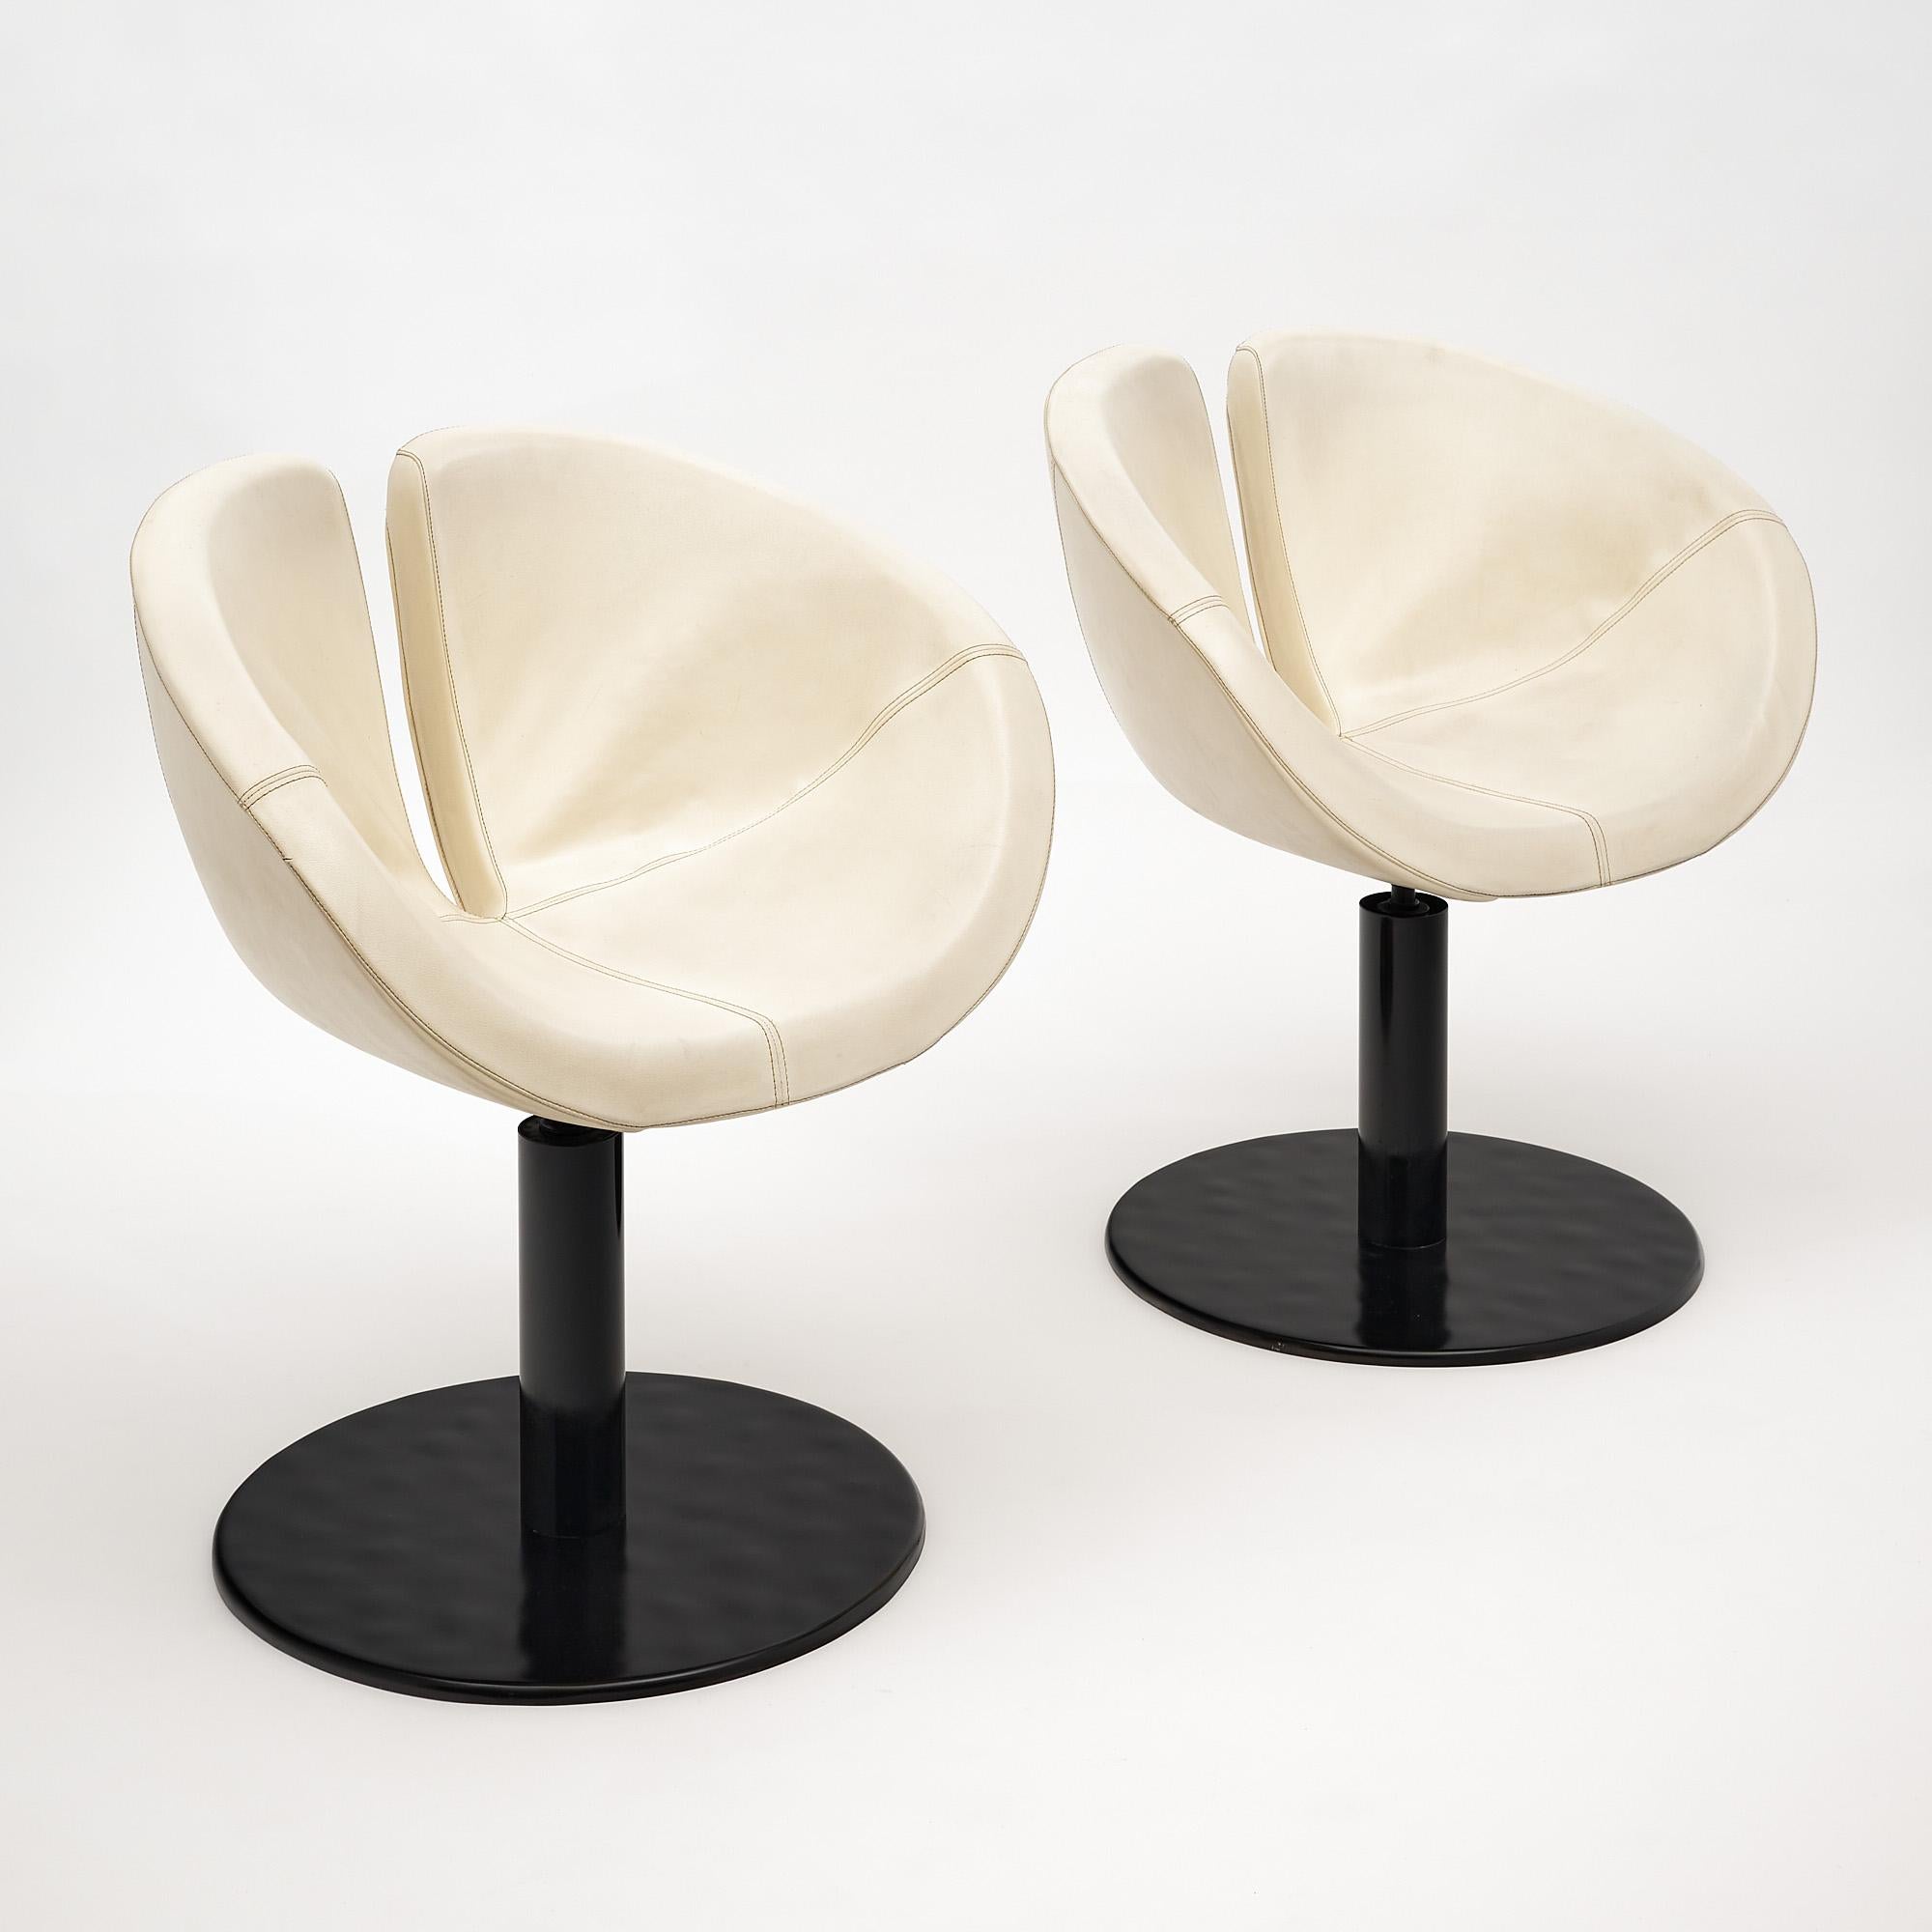 Pair of swiveling armchairs, Italian, with the original ivory vinyl upholstery and lacquered steel base.